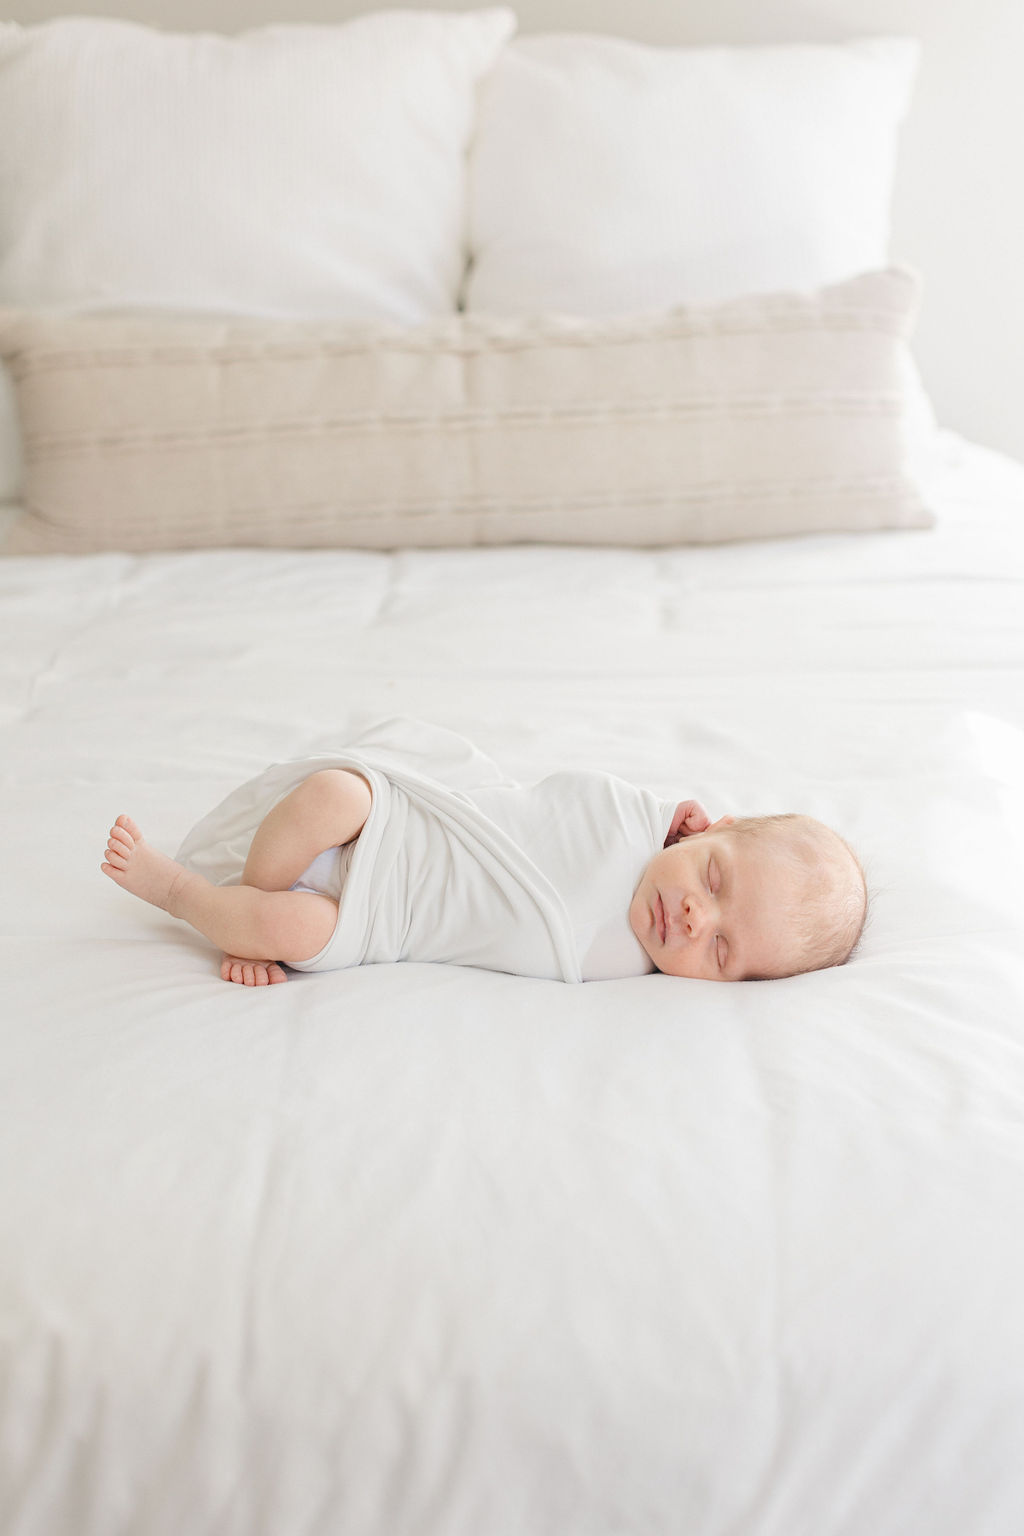 A newborn baby sleeps on its side in a white swaddle on a white bed